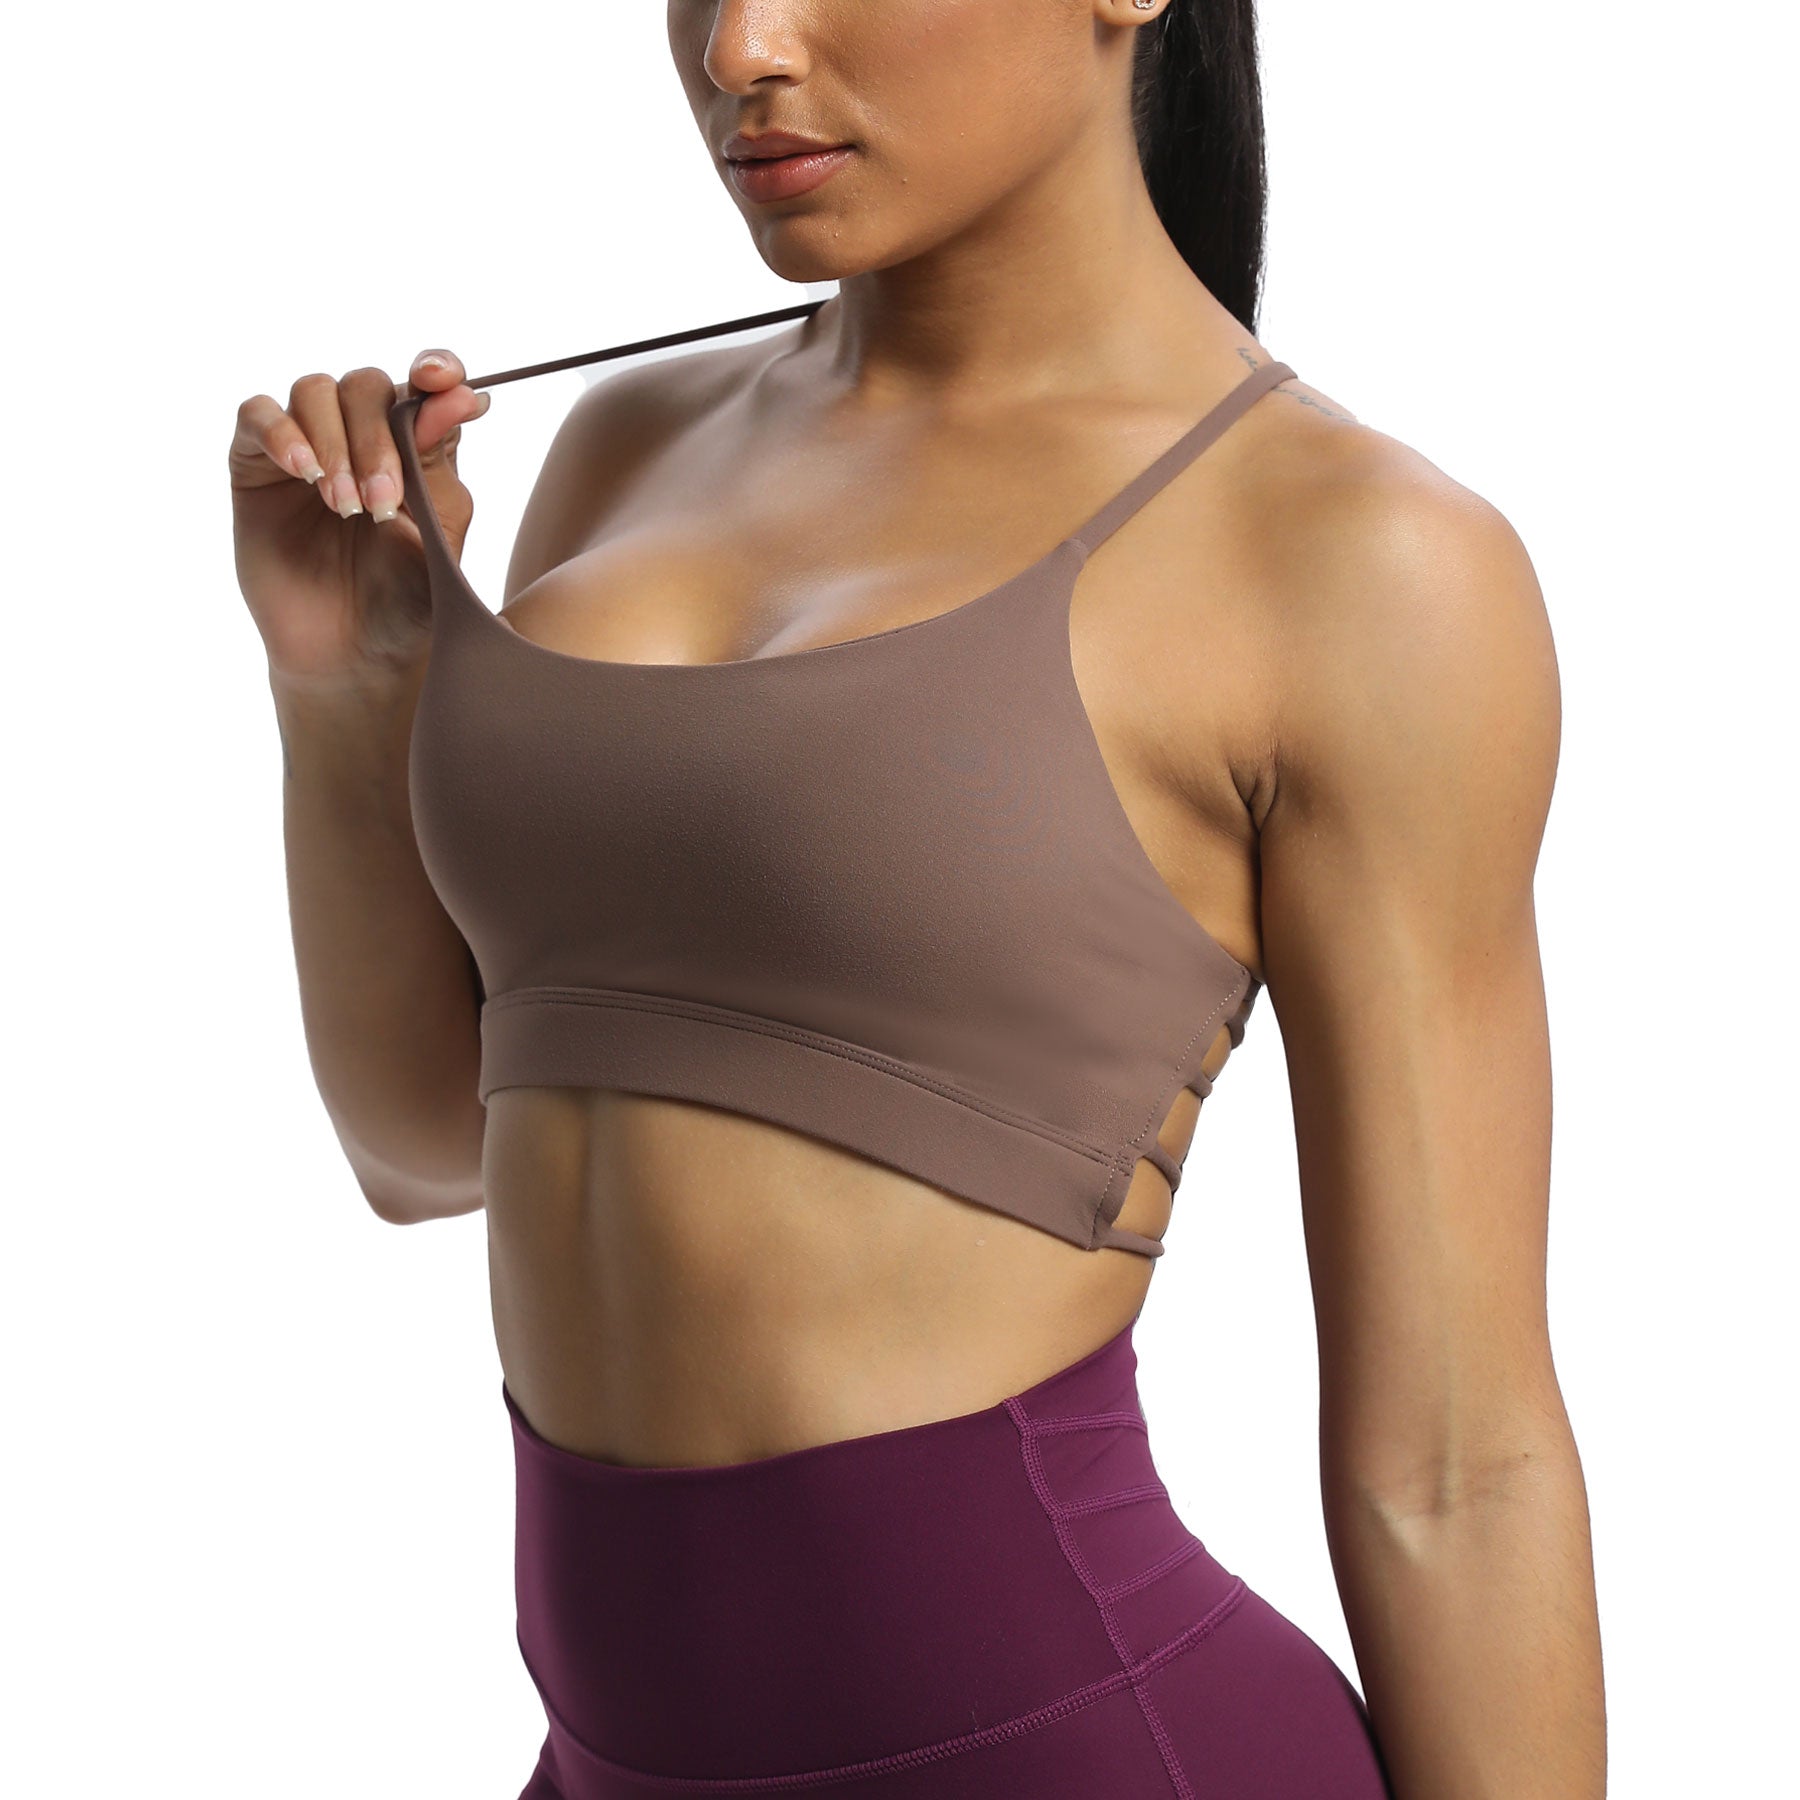 Aoxjox "Julie" Double Buckle Crossover Bra